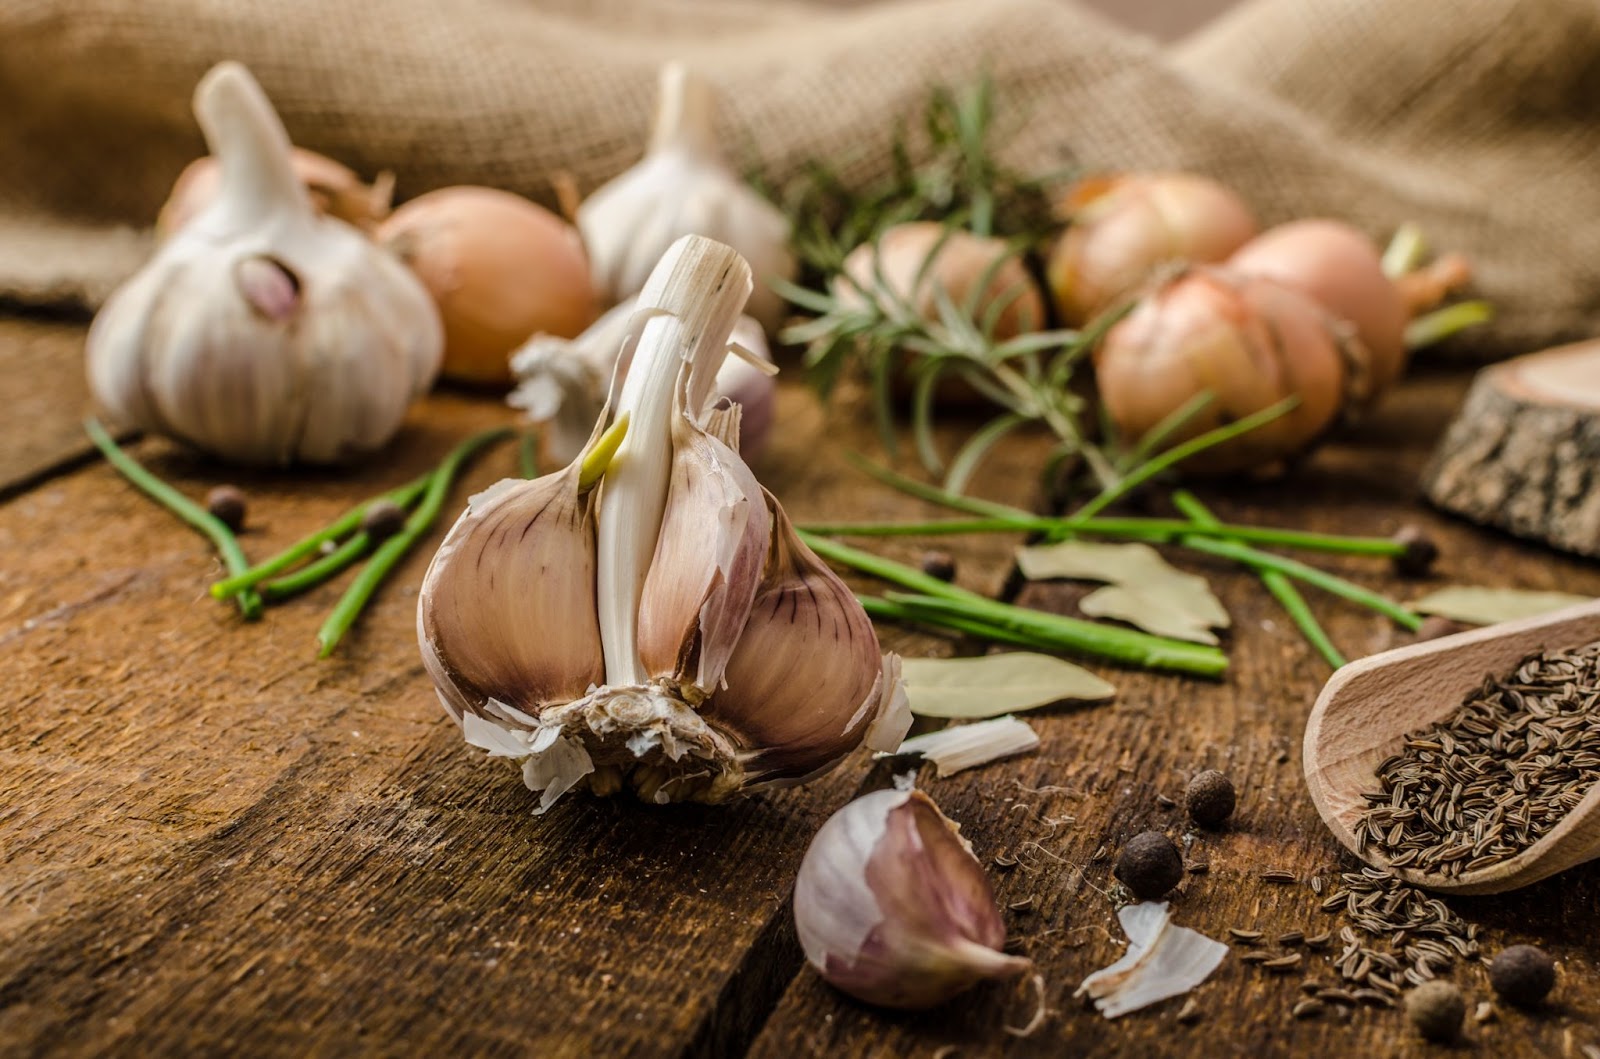 <p>Garlic, renowned for its pungent aroma and distinctive flavor, is much more than just a culinary staple. This humble bulb is a nutritional powerhouse, packed with antioxidants and sulfur compounds that offer a multitude of health benefits.</p> <p>Studies suggest that garlic may play a role in bolstering the immune system, reducing cholesterol levels, and even protecting against heart disease and certain cancers. Its potent compounds have been shown to have antibacterial, antiviral, and antifungal properties, making it a valuable ally in the fight against infections. Whether you add it to your favorite savory dishes for a flavorful kick or roast it for a milder taste, garlic is a simple and delicious way to enhance both the taste and nutritional value of your meals.</p>